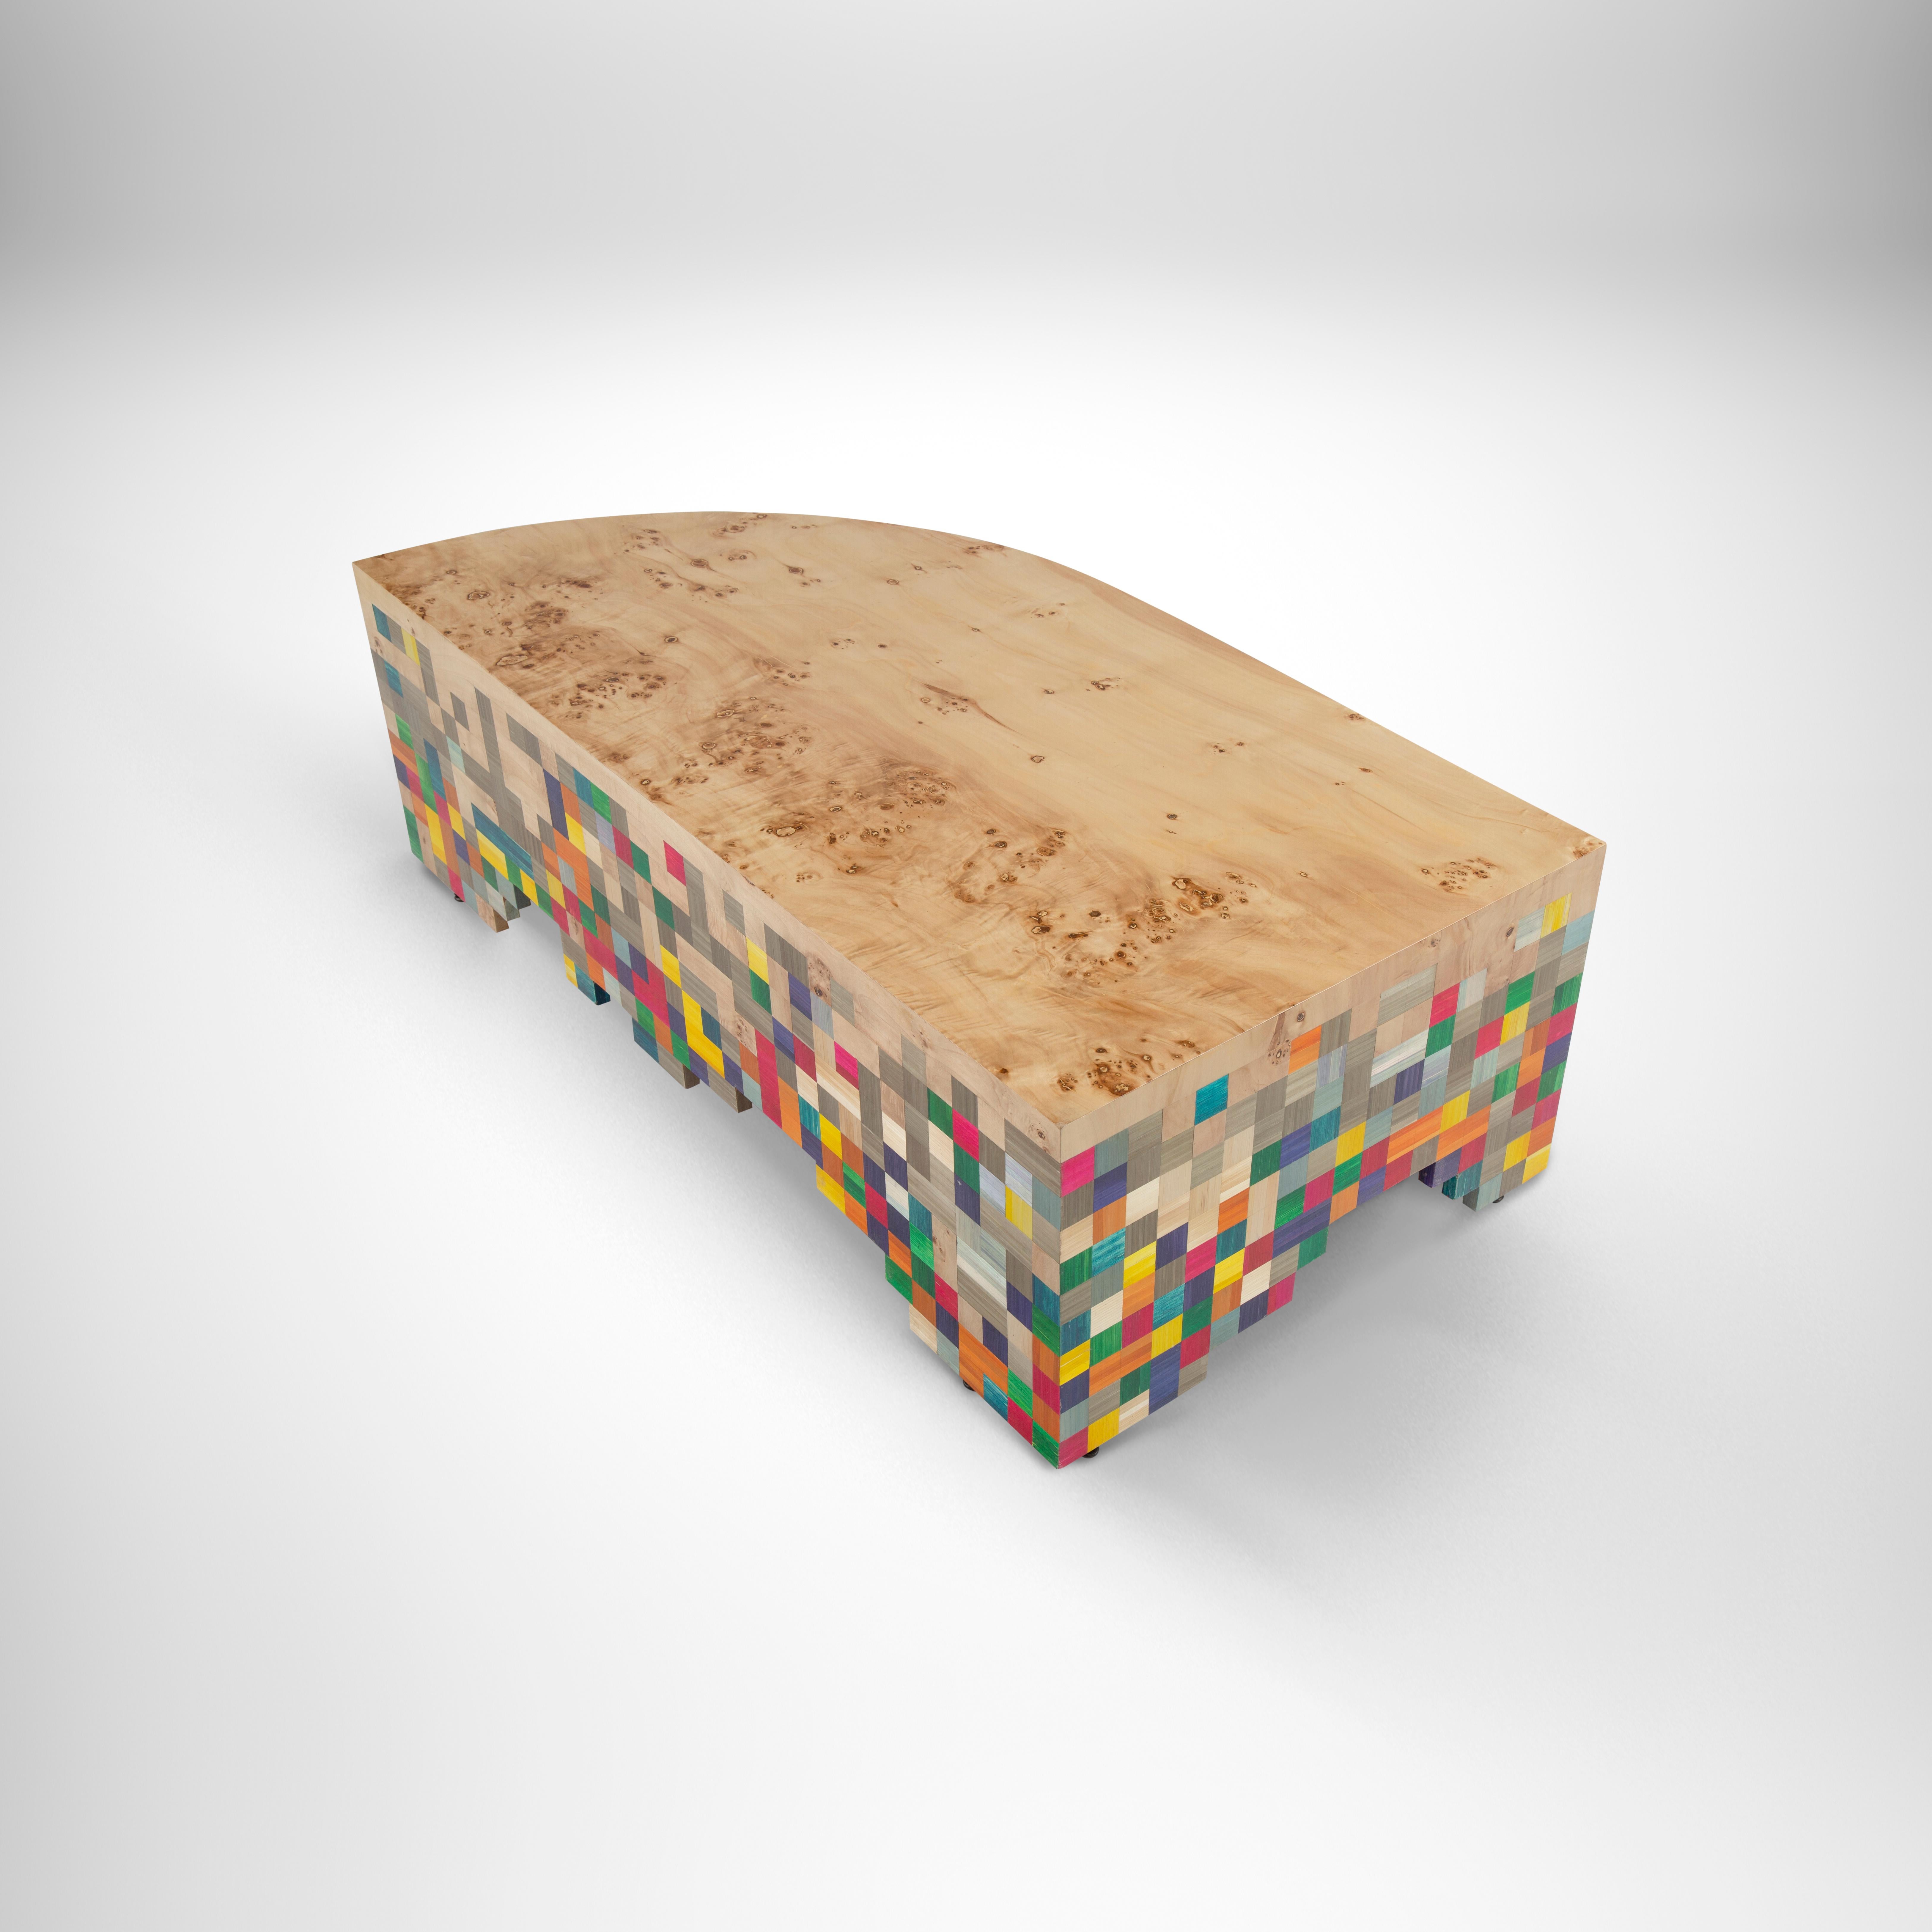 Egyptian Asymmetric Colorful Hand-Laid Straw Coffee Table with Rare Apple Rind Veneer For Sale